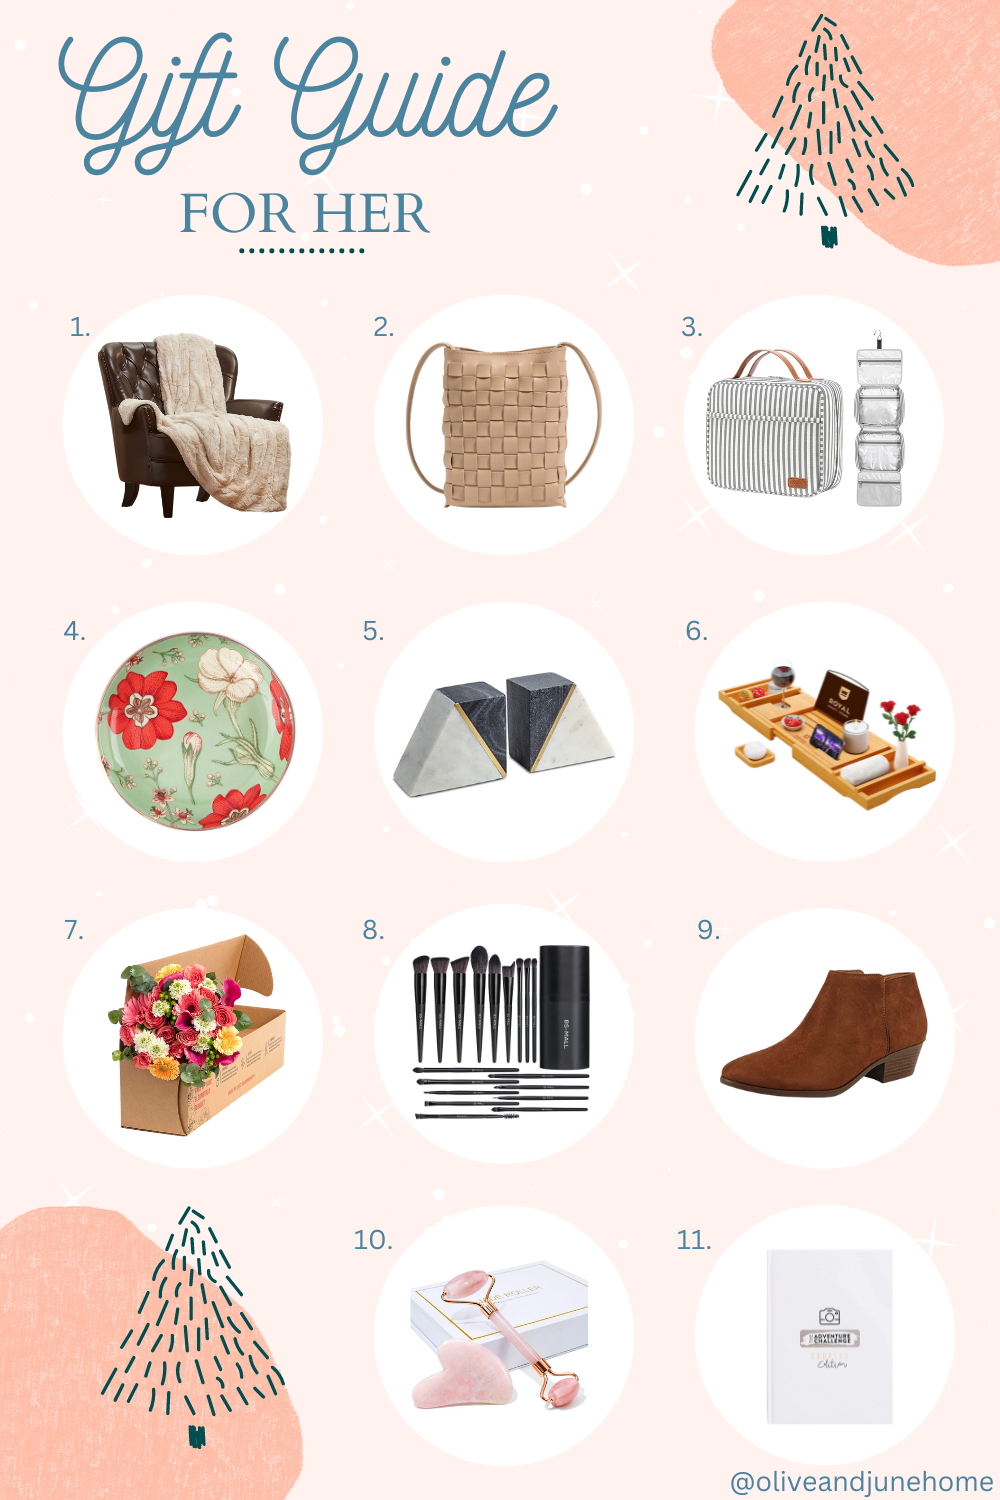 Holiday Gift Guide: home gift ideas - une femme d'un certain âge